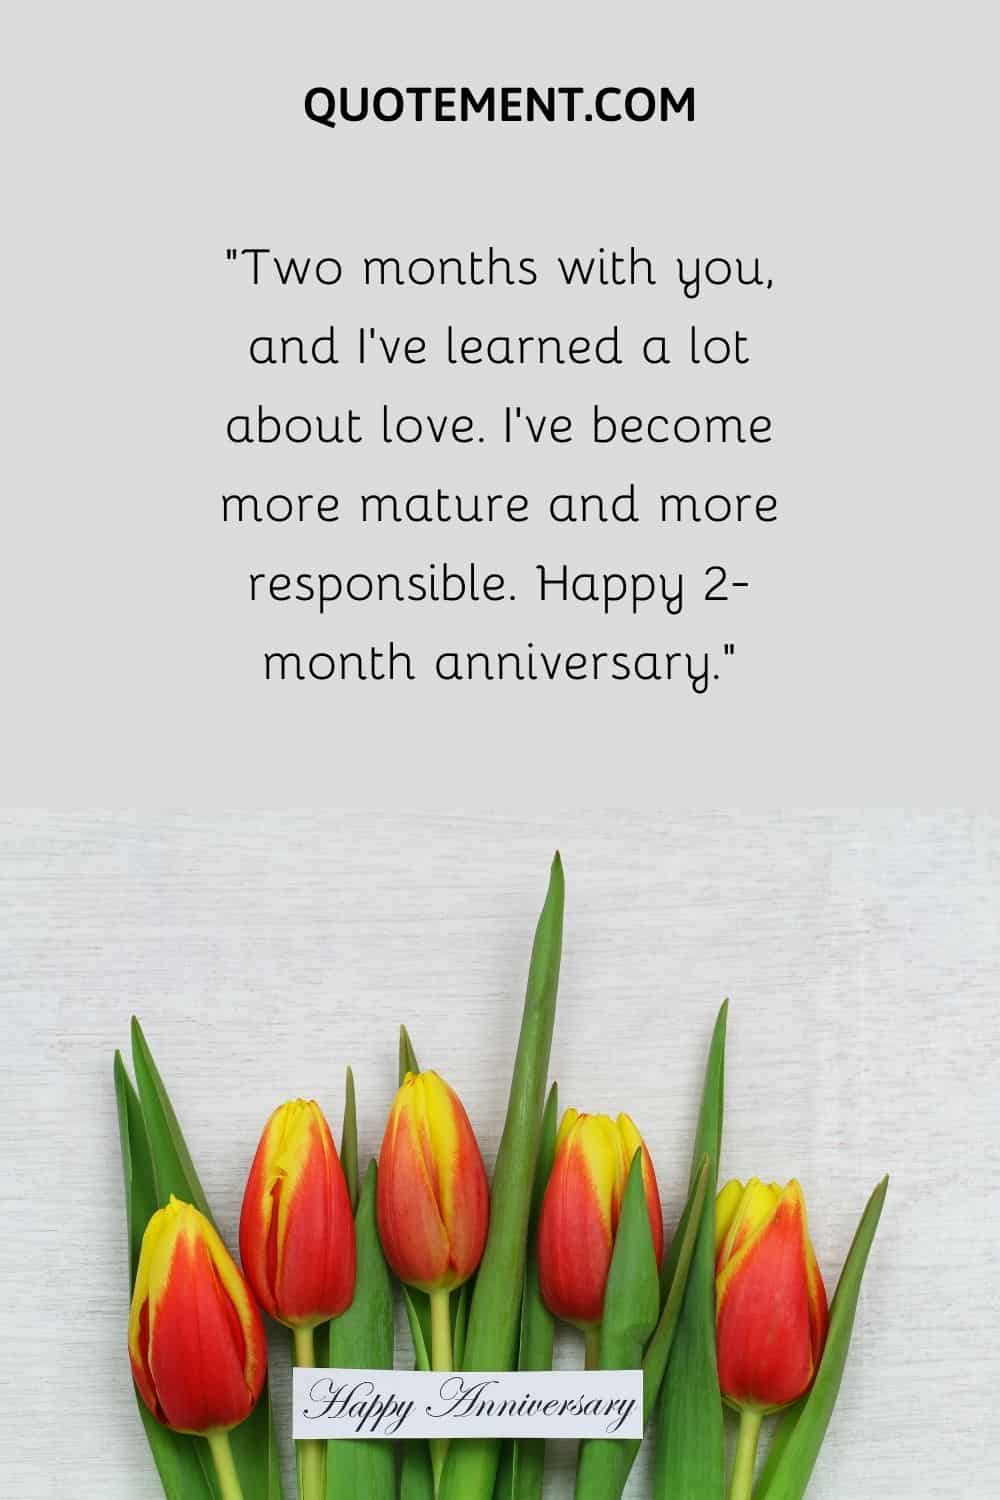 “Two months with you, and I’ve learned a lot about love. I’ve become more mature and more responsible. Happy 2-month anniversary.”